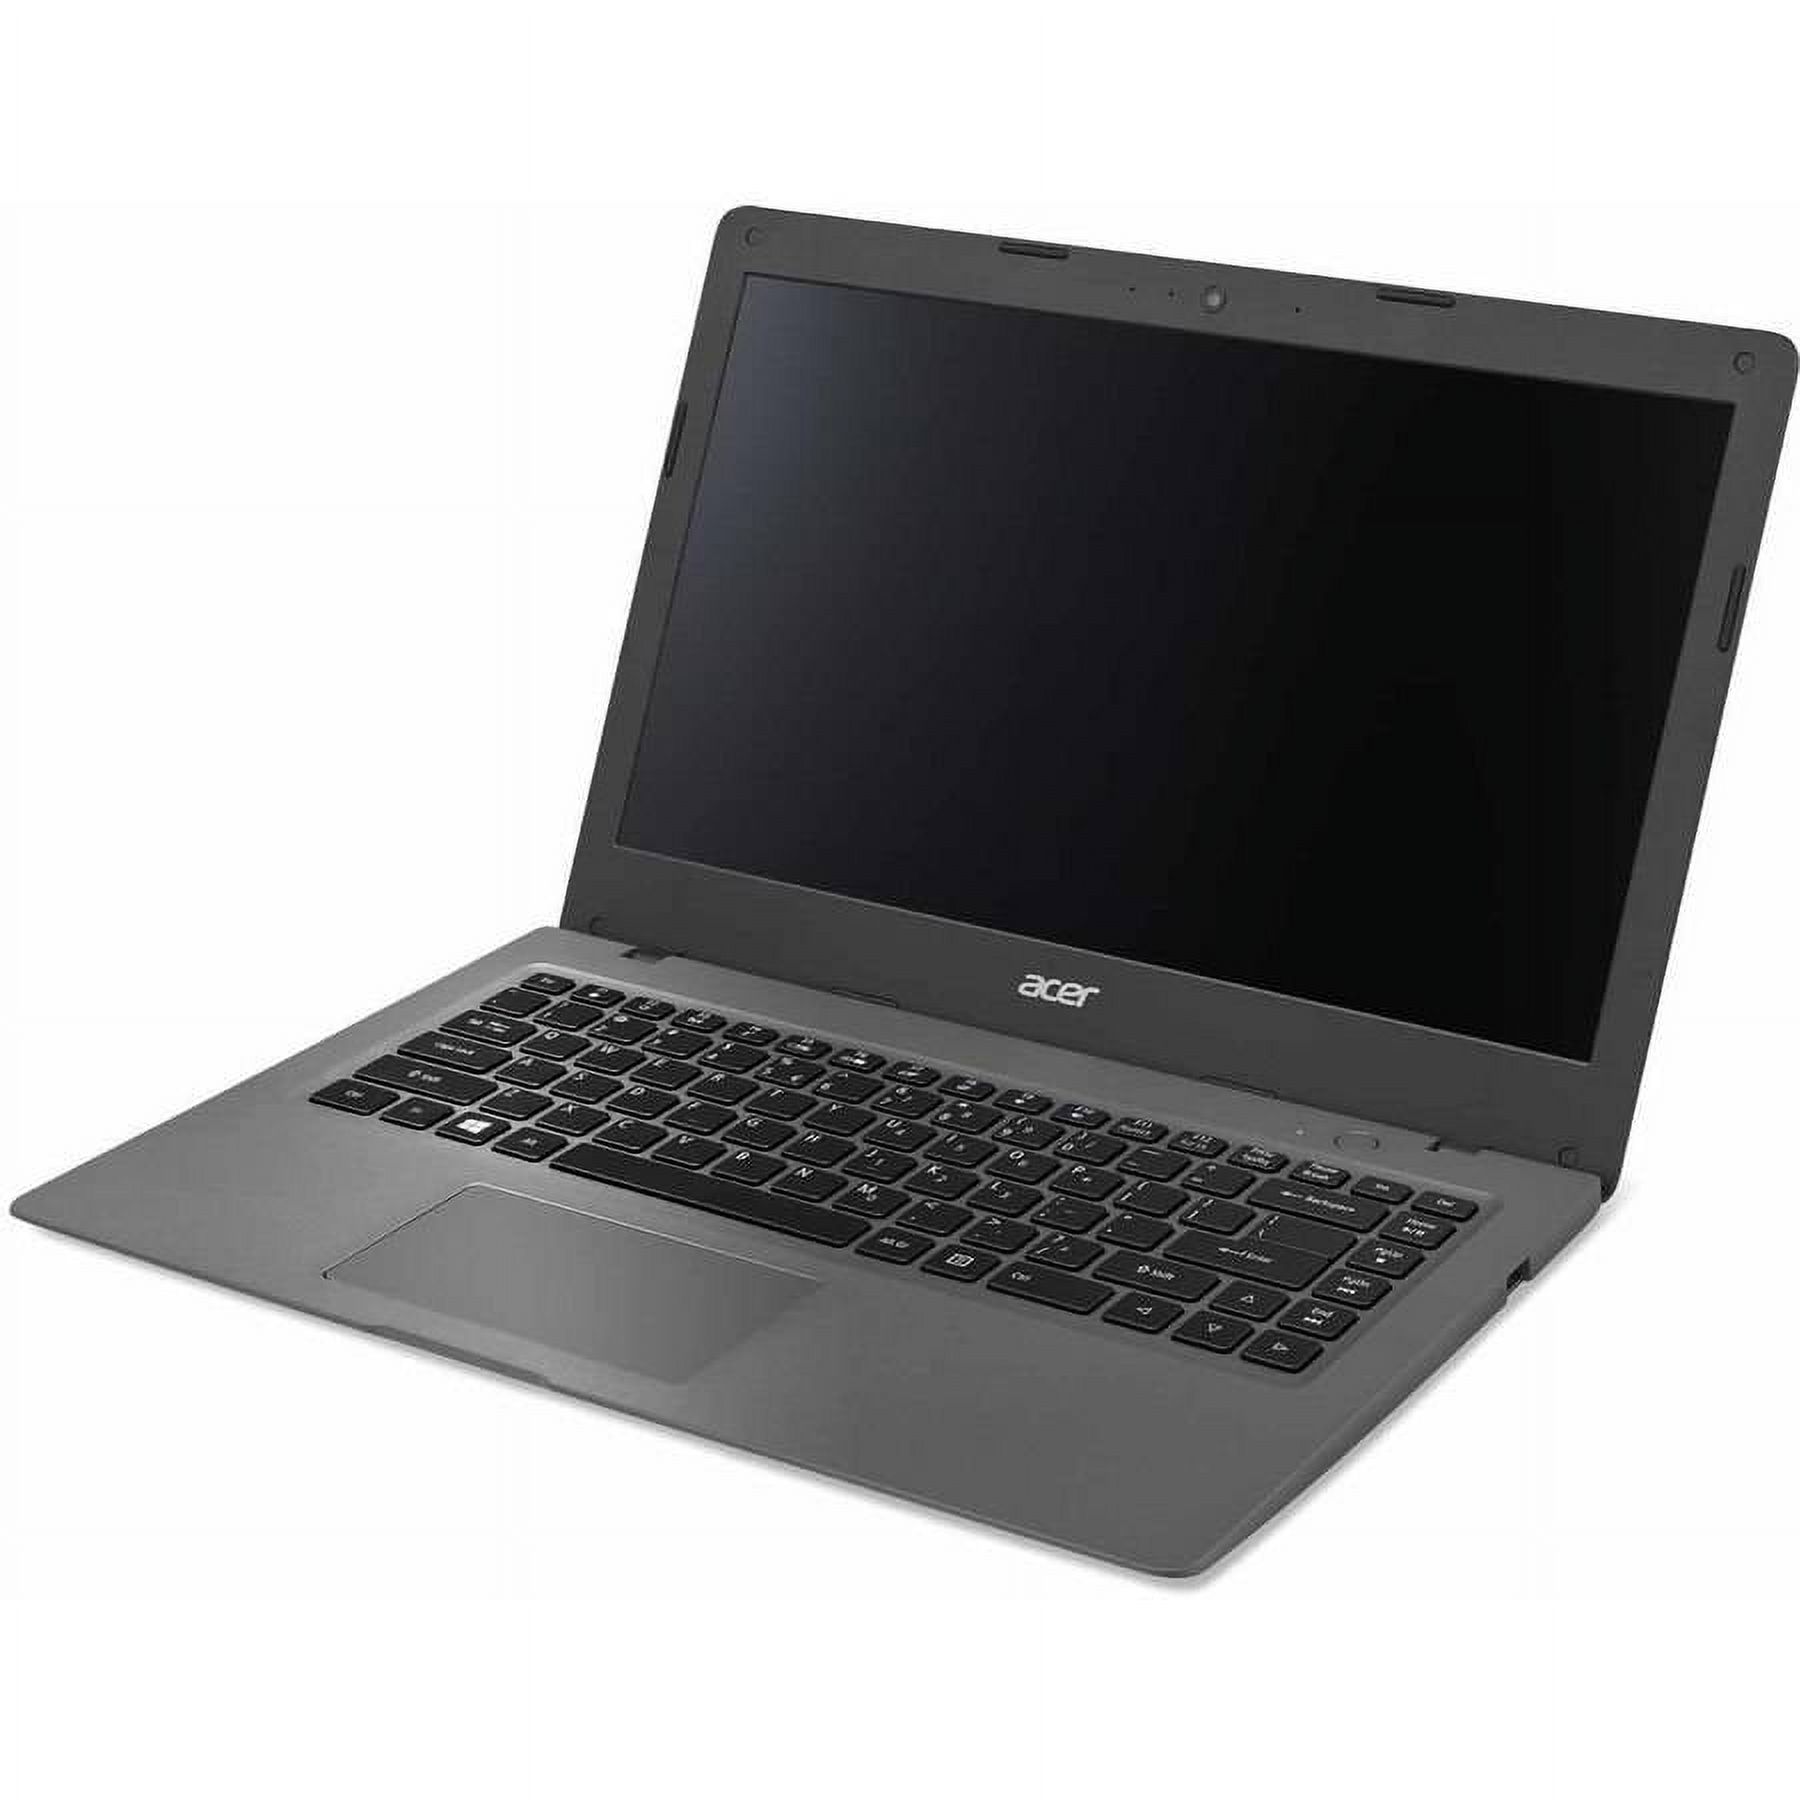 Acer Mineral Gray 14" Aspire One Cloudbook AO1-431-C8G8 Laptop PC, Windows 10, Office 365 Personal 1-year subscription included with Intel Celeron N3050 Processor, 2GB Memory, 32GB eMMC - image 5 of 9